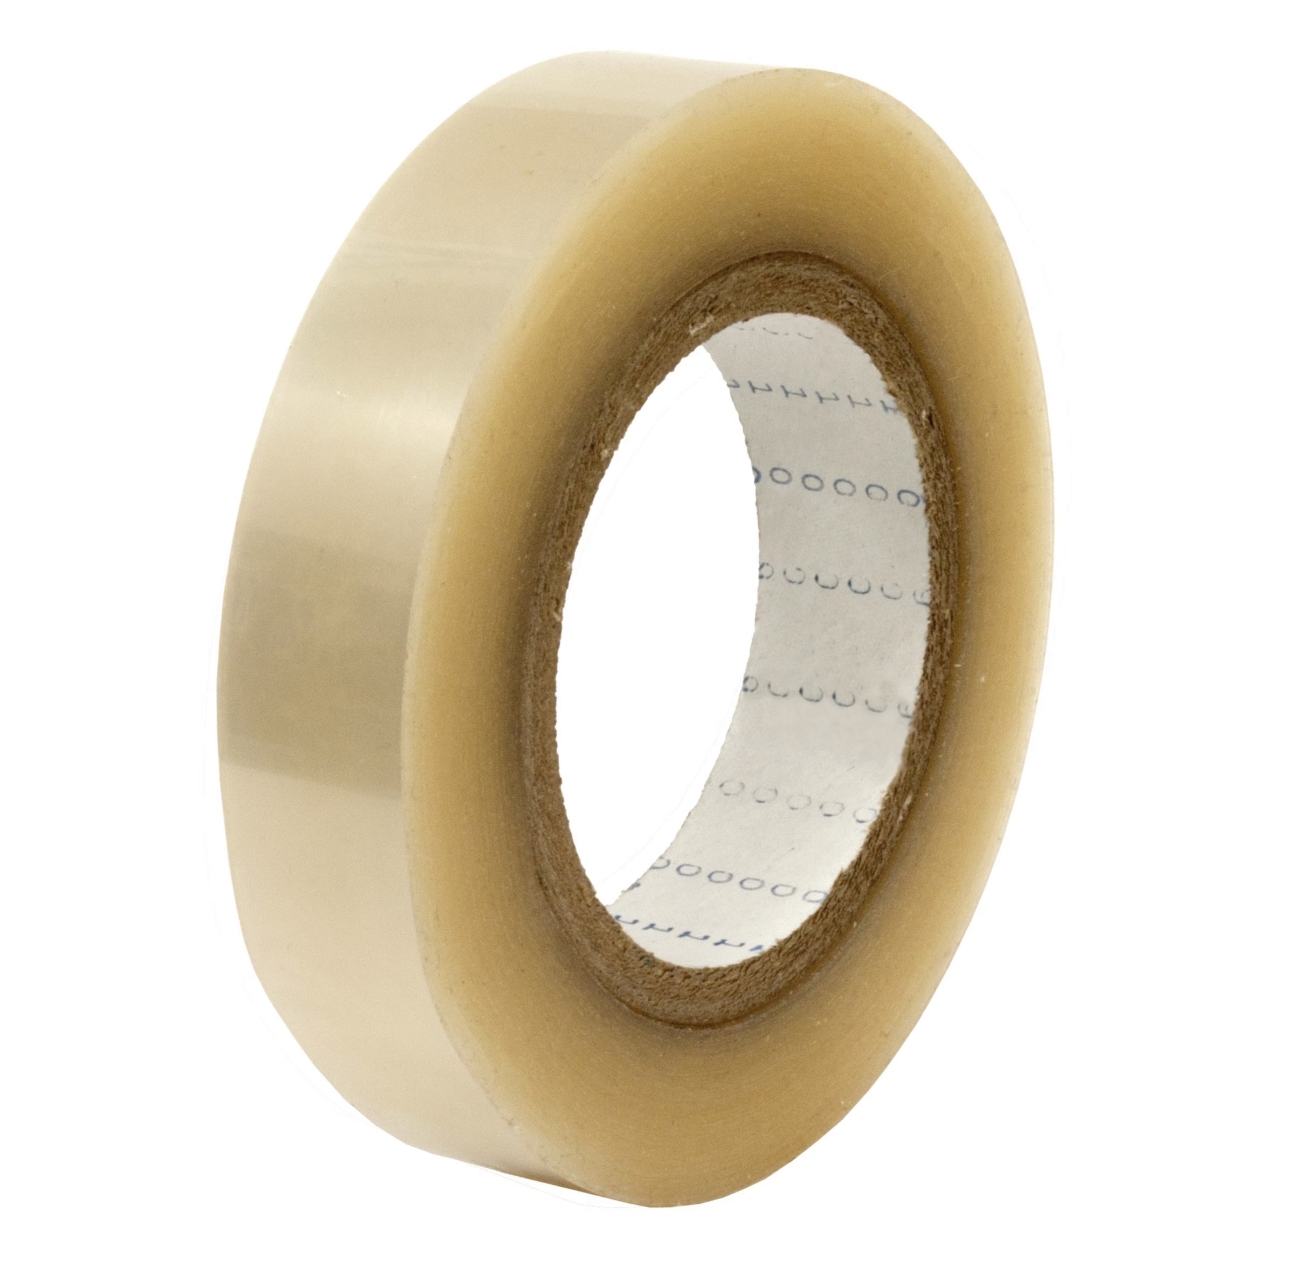 S-K-S dubbelzijdige kleefband met polyester drager 960, transparant, 75 mm x 66 m, siliconen kleefband, 0,085 mm